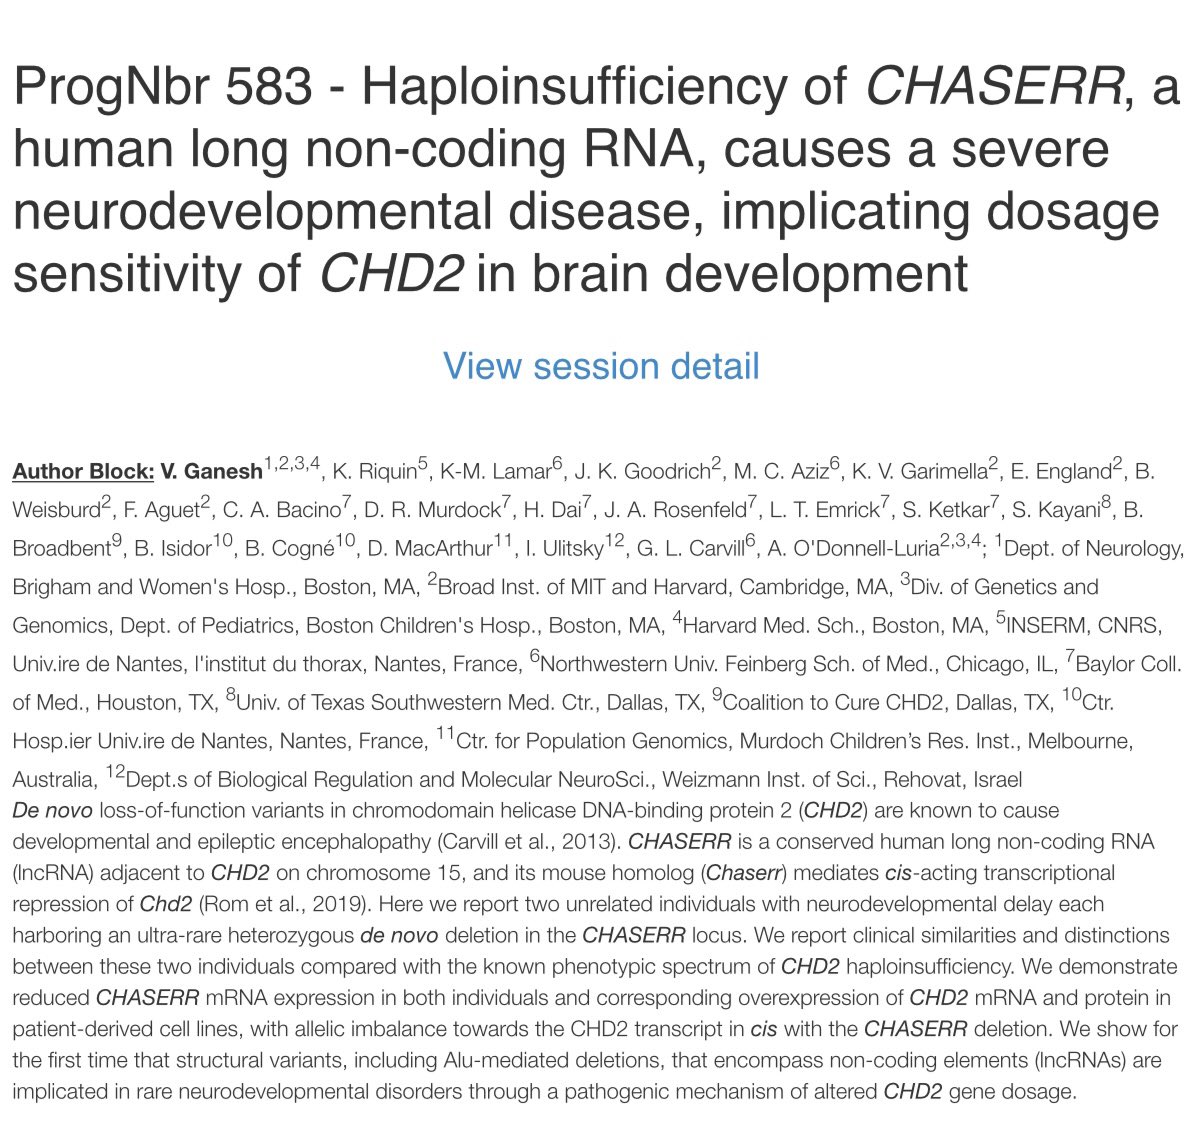 See history being made live at ASHG 22 - watch @VGaneshMDPhD in S91 present the first 2 cases in the world of a lncRNA causing Mendelian disease = too much Chd2. Save the best for last! #ASHG22 @curechd2 @AnneOtation @CarvillLab @IgorUlitsky @UDNconnect @broadinstitute @UDN_PEER